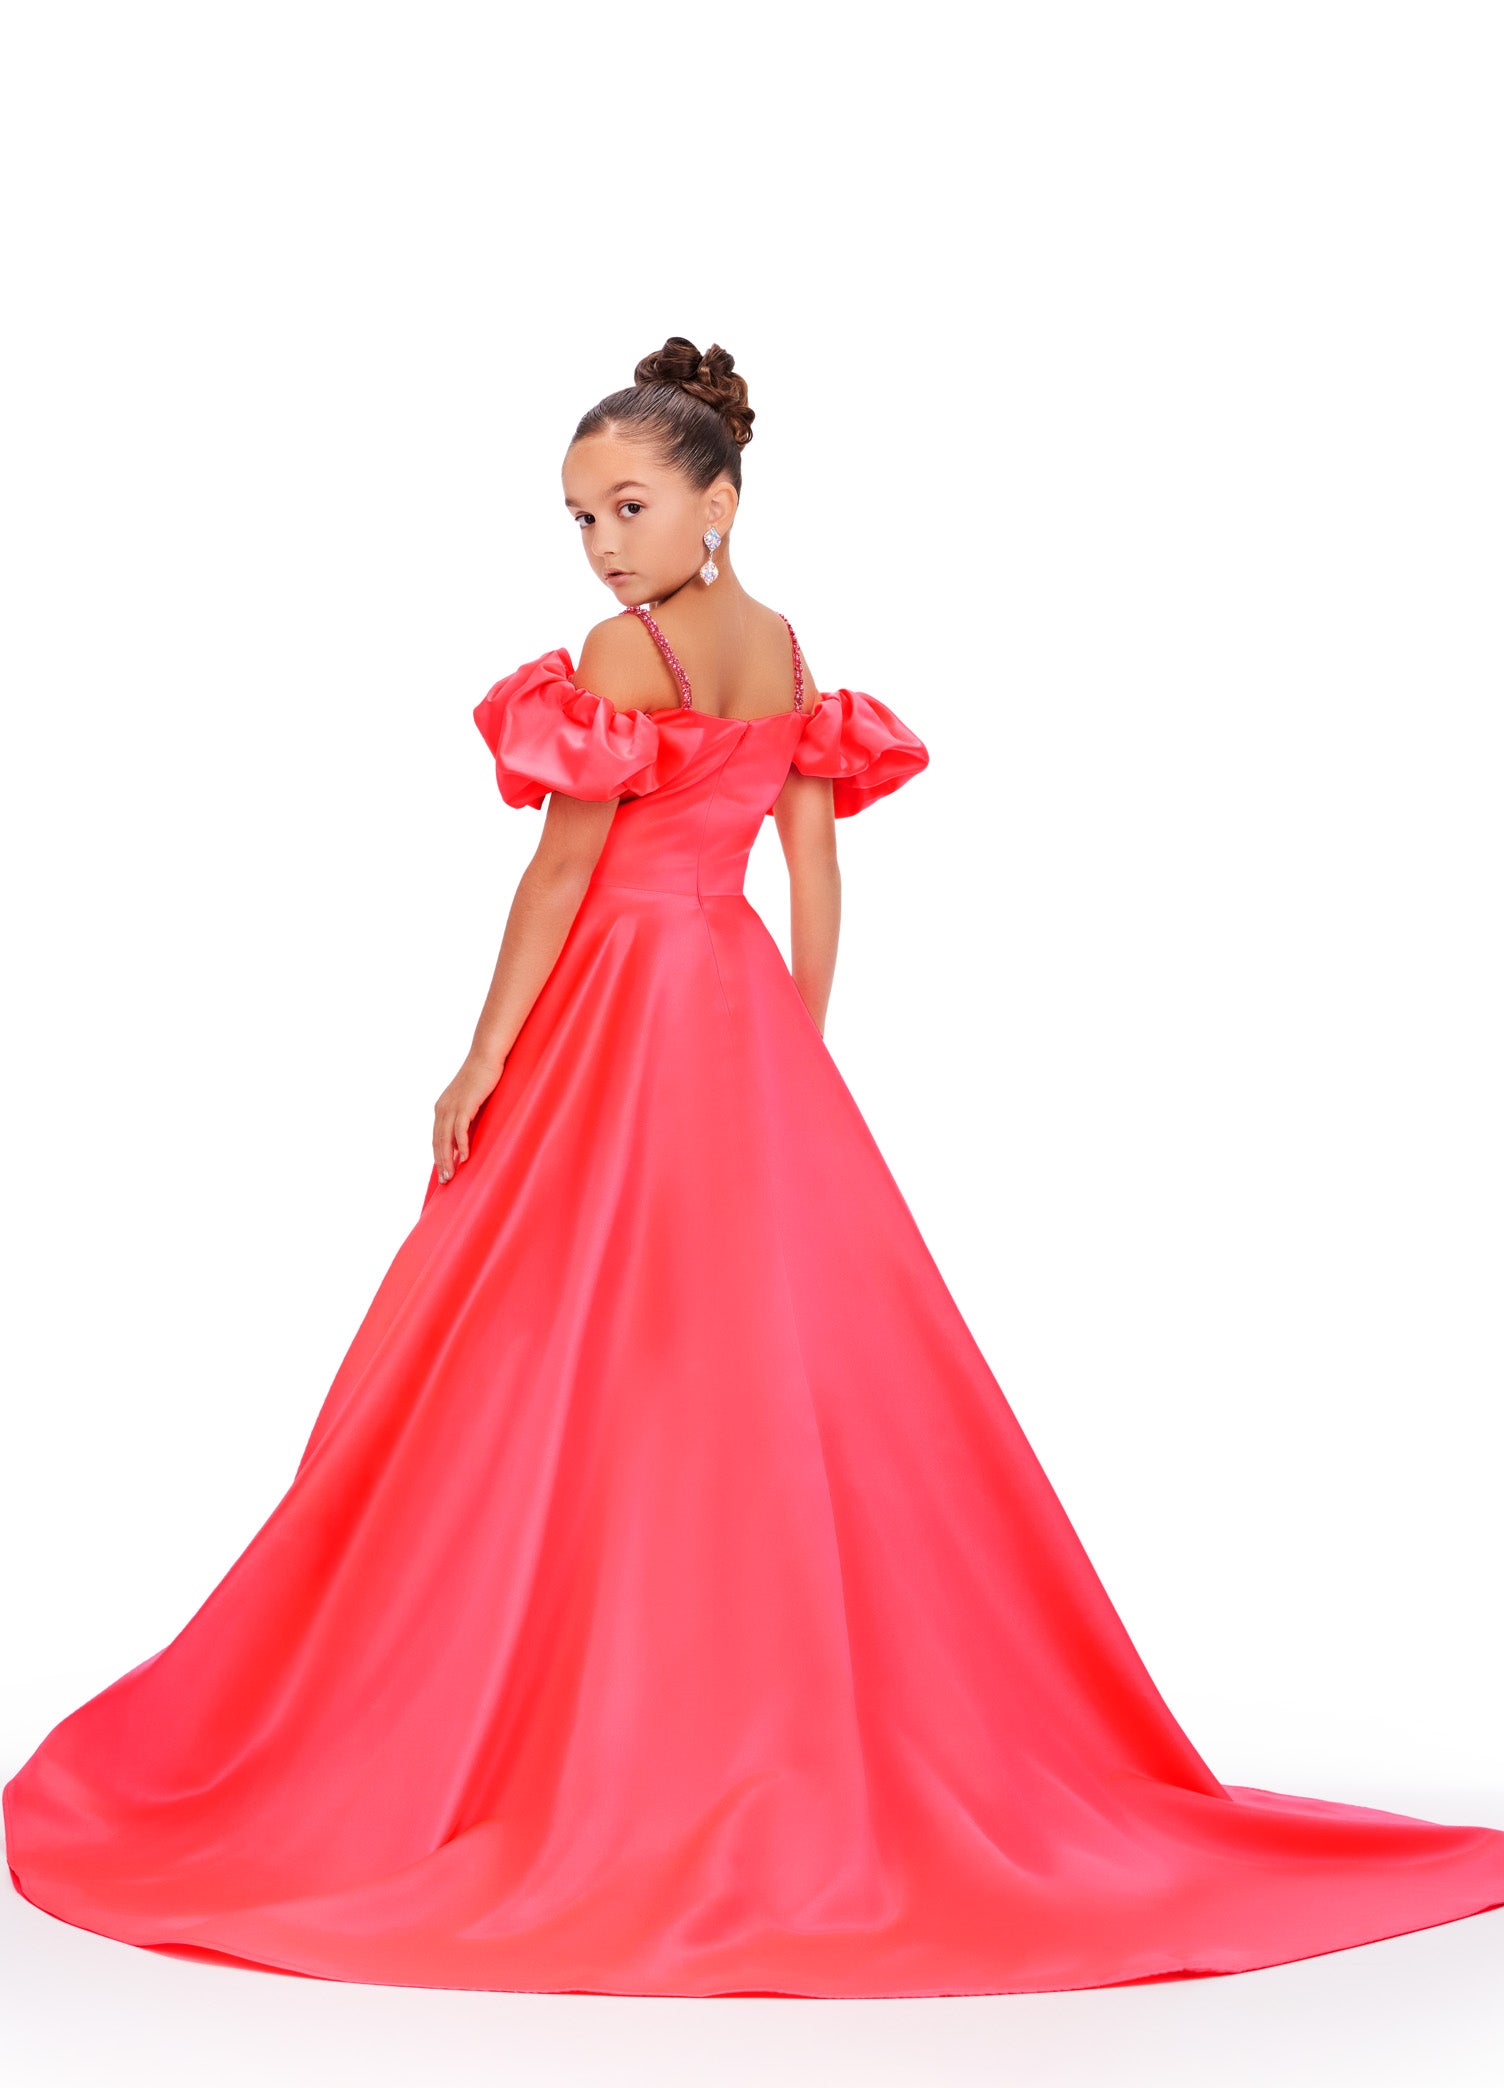 Elevate your little girl's pageant look with our Ashley Lauren Kids 8256 Girls Satin A Line Puff Sleeve Pageant Dress. This elegant ballgown features a stunning off the shoulder design and puff sleeves, adding a touch of sophistication to her appearance. Made with high-quality satin fabric, this dress will make her feel like a true princess. 